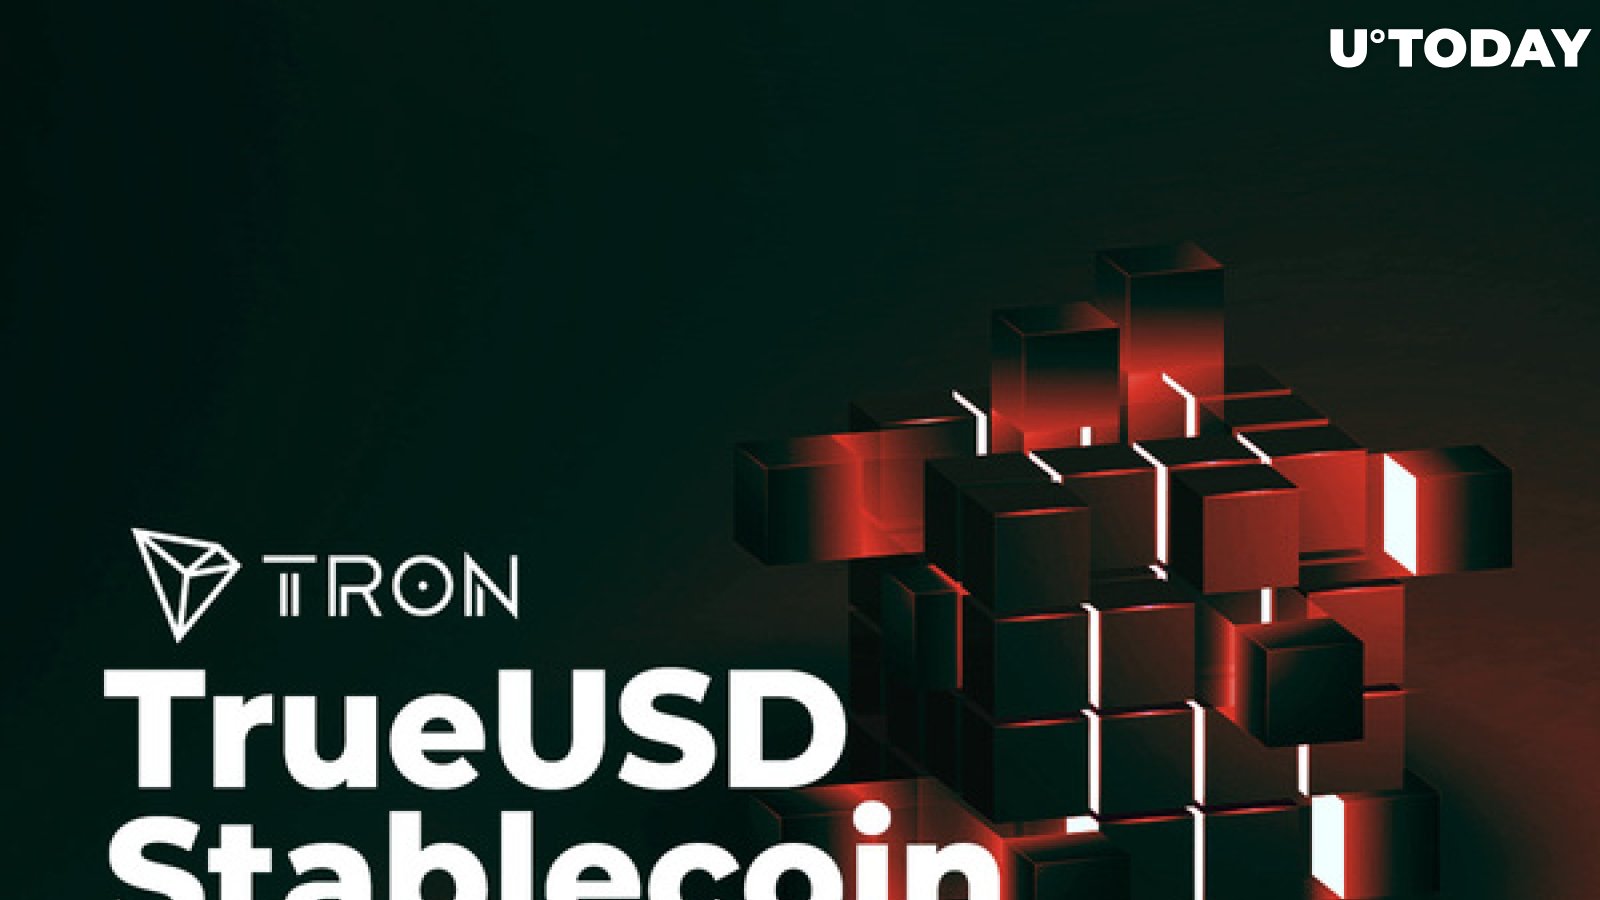 TrueUSD Stablecoin to Launch on Tron Blockchain in 2 Days